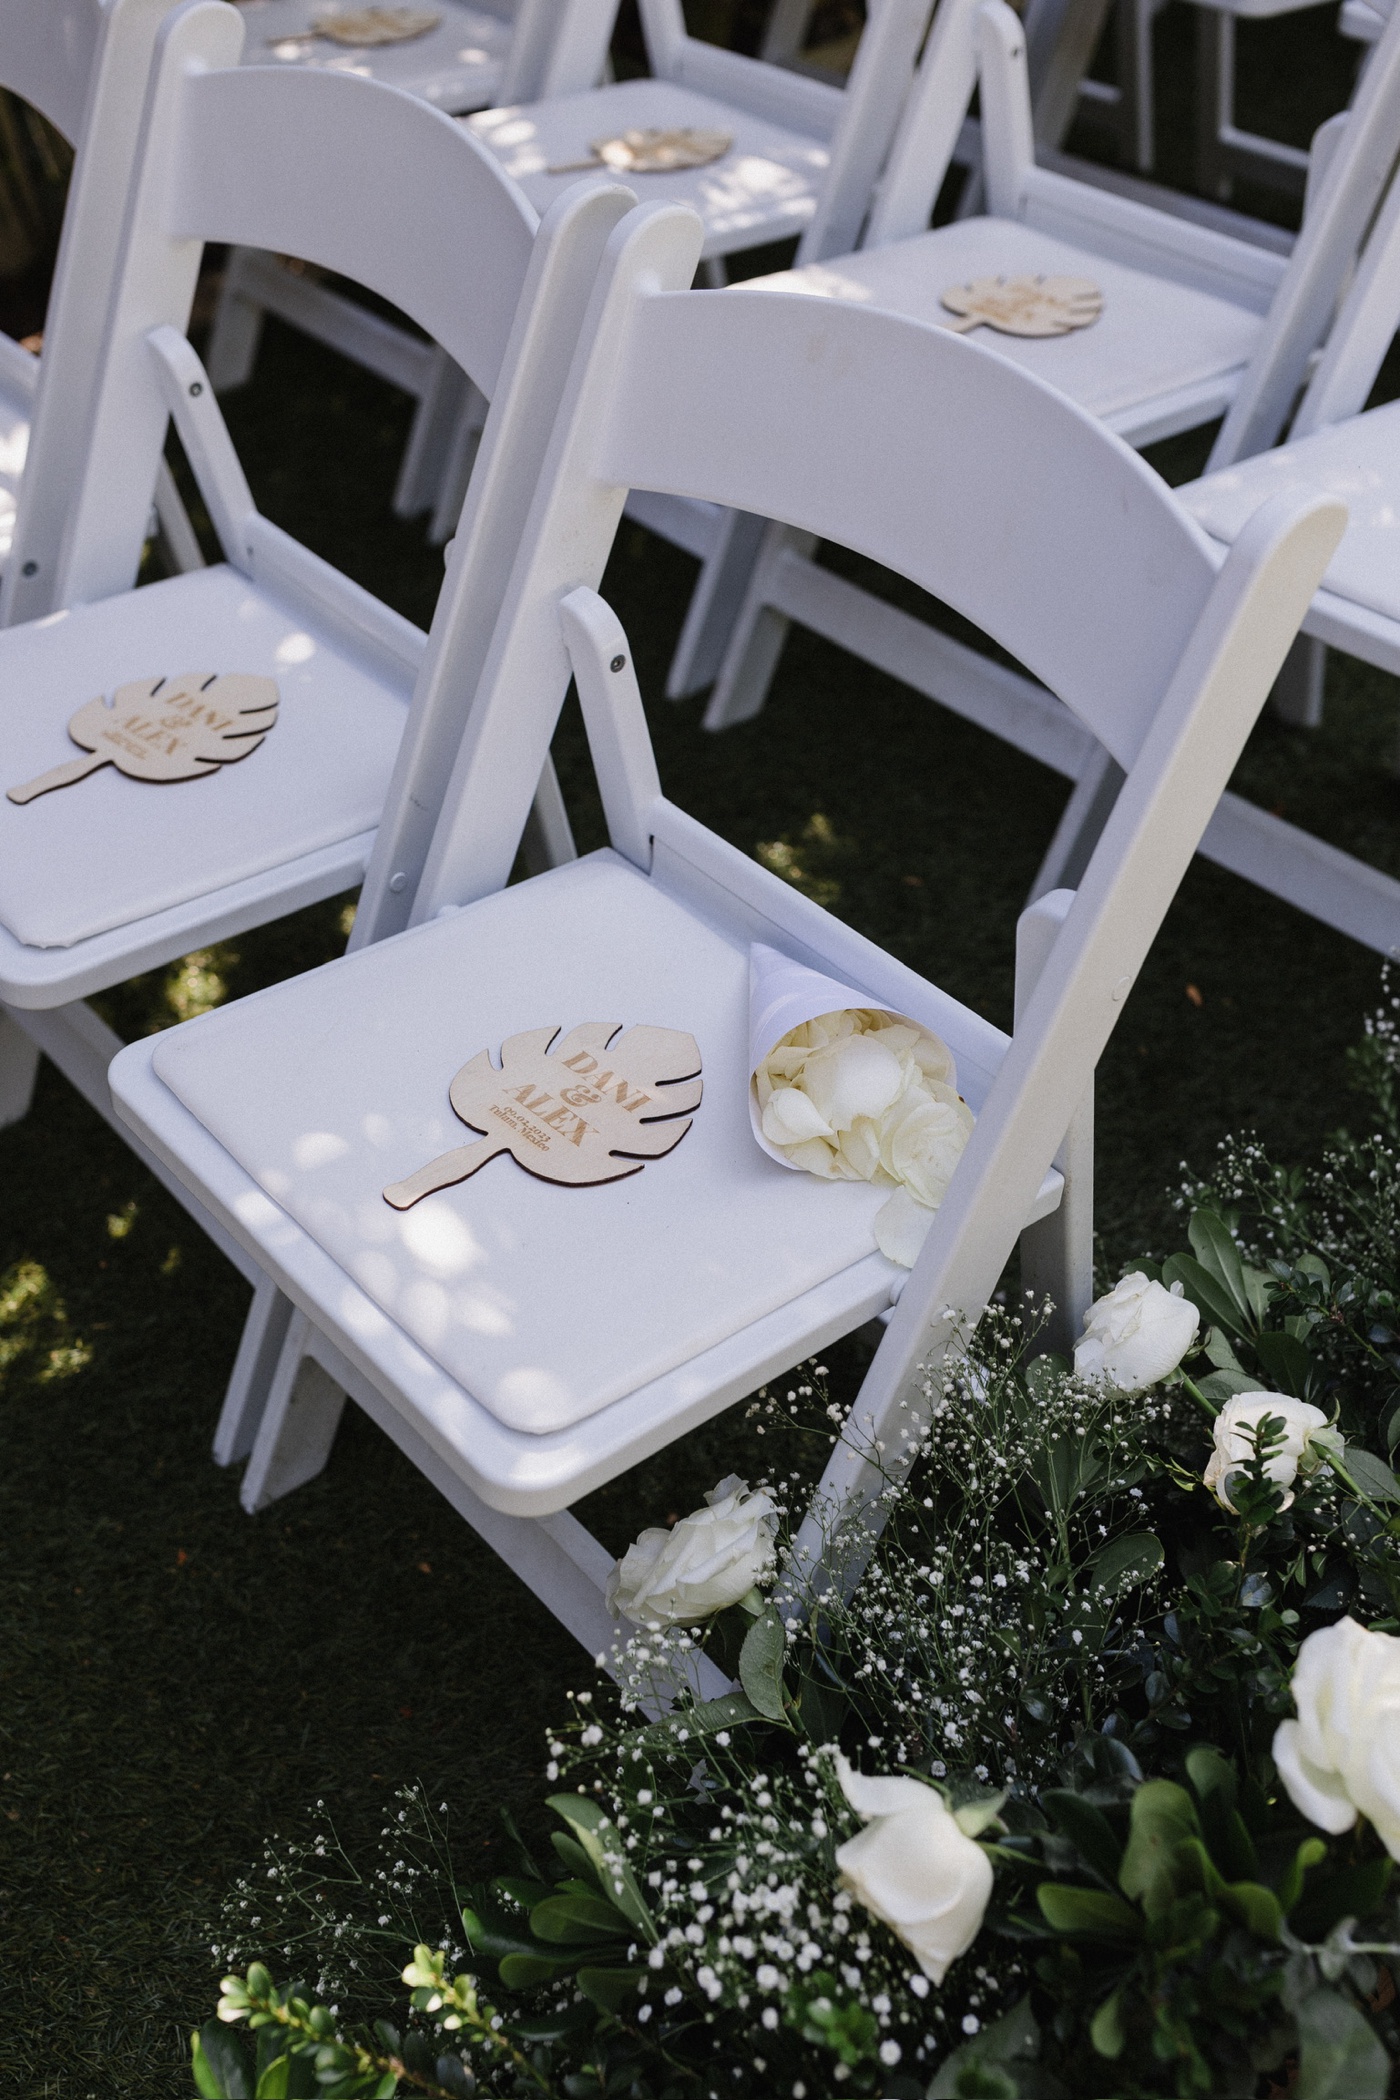 Custom wooden palm hand fans at an outdoor wedding ceremony